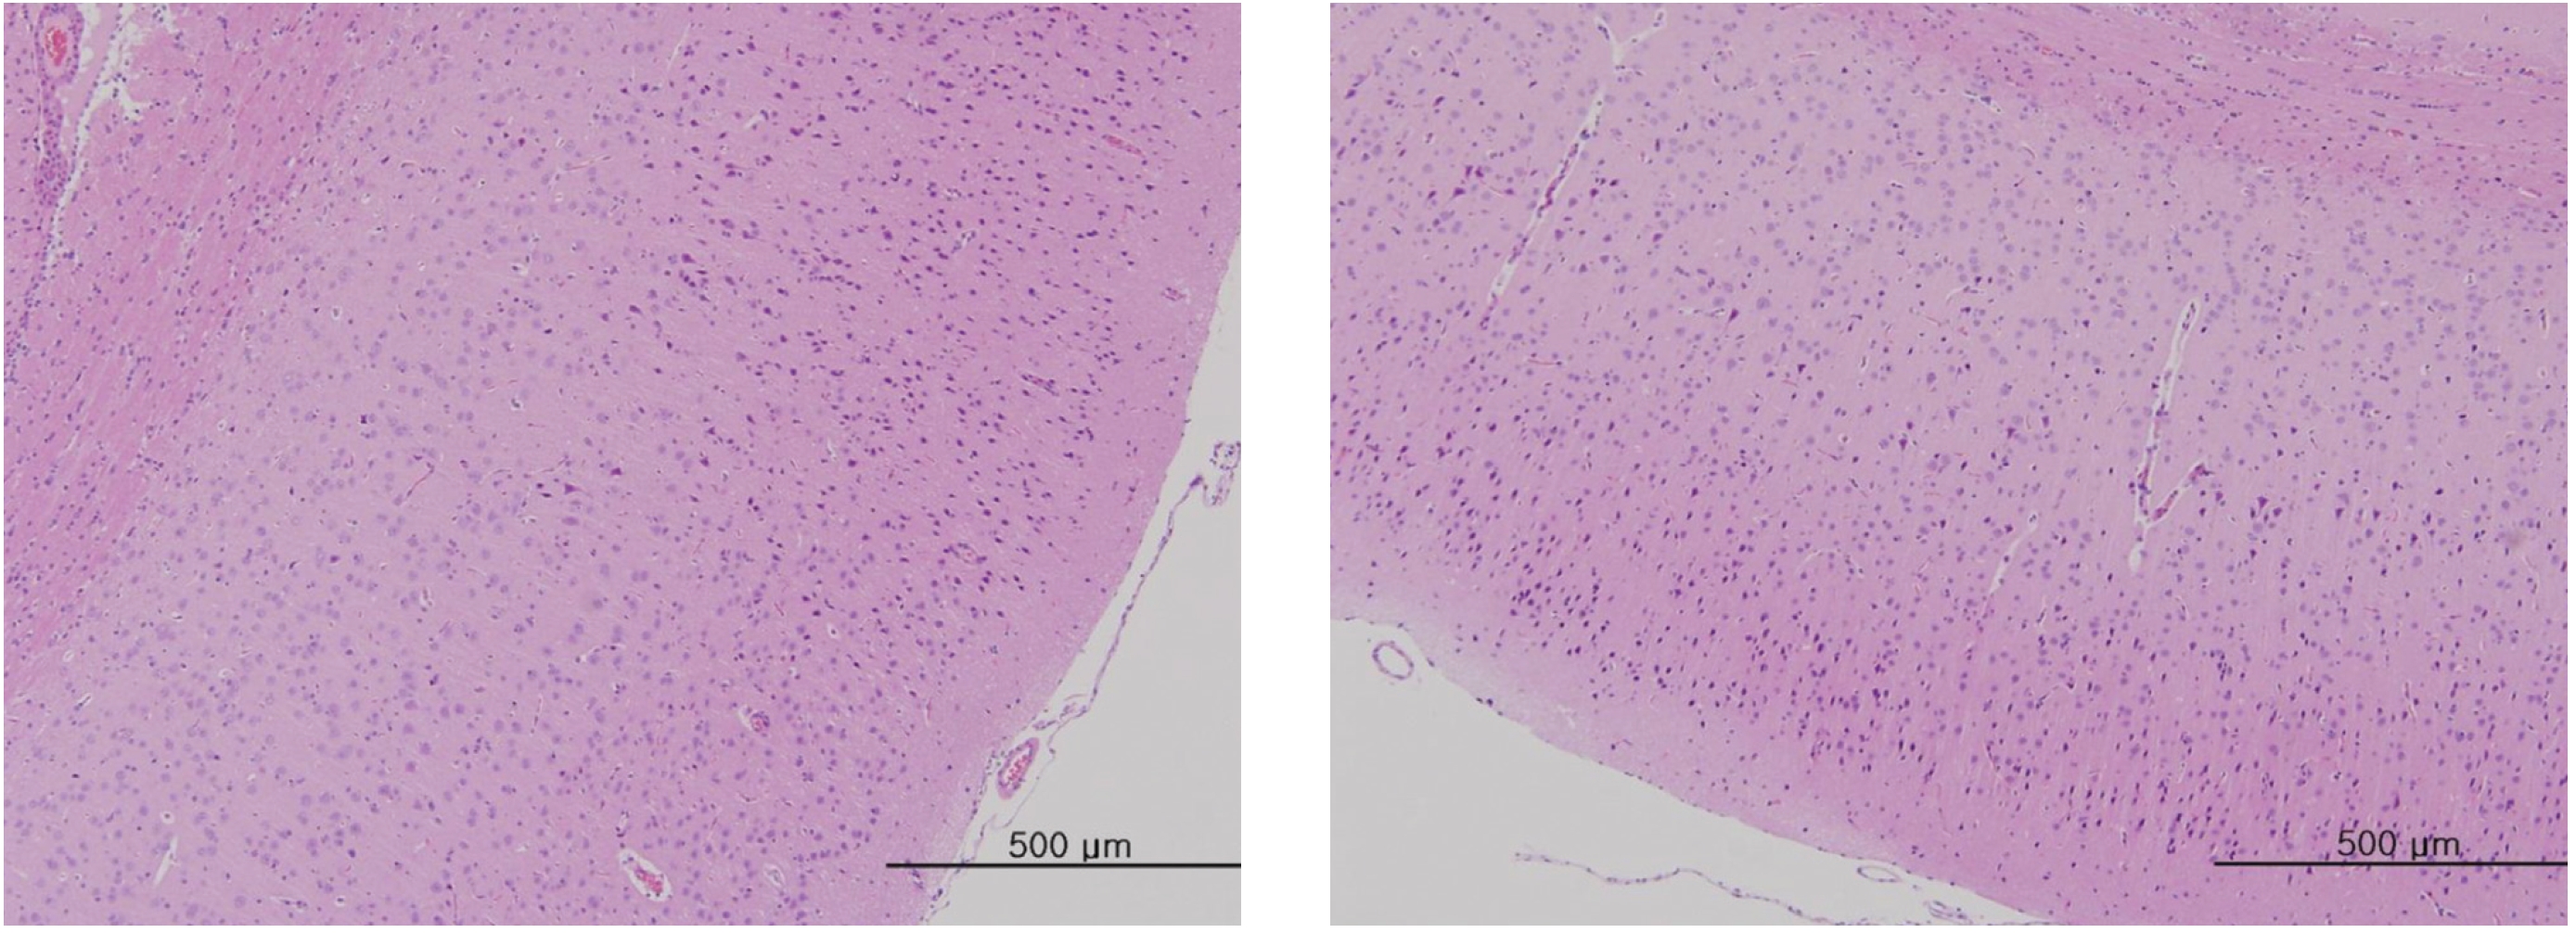 The tissue of the brain from an intramuscular single-dose toxicity study of ginseng pharmacopuncture in Sprague-Dawley Rats. No histopathological change was detected by hematoxylin & eosin staining (× 200, × 200).